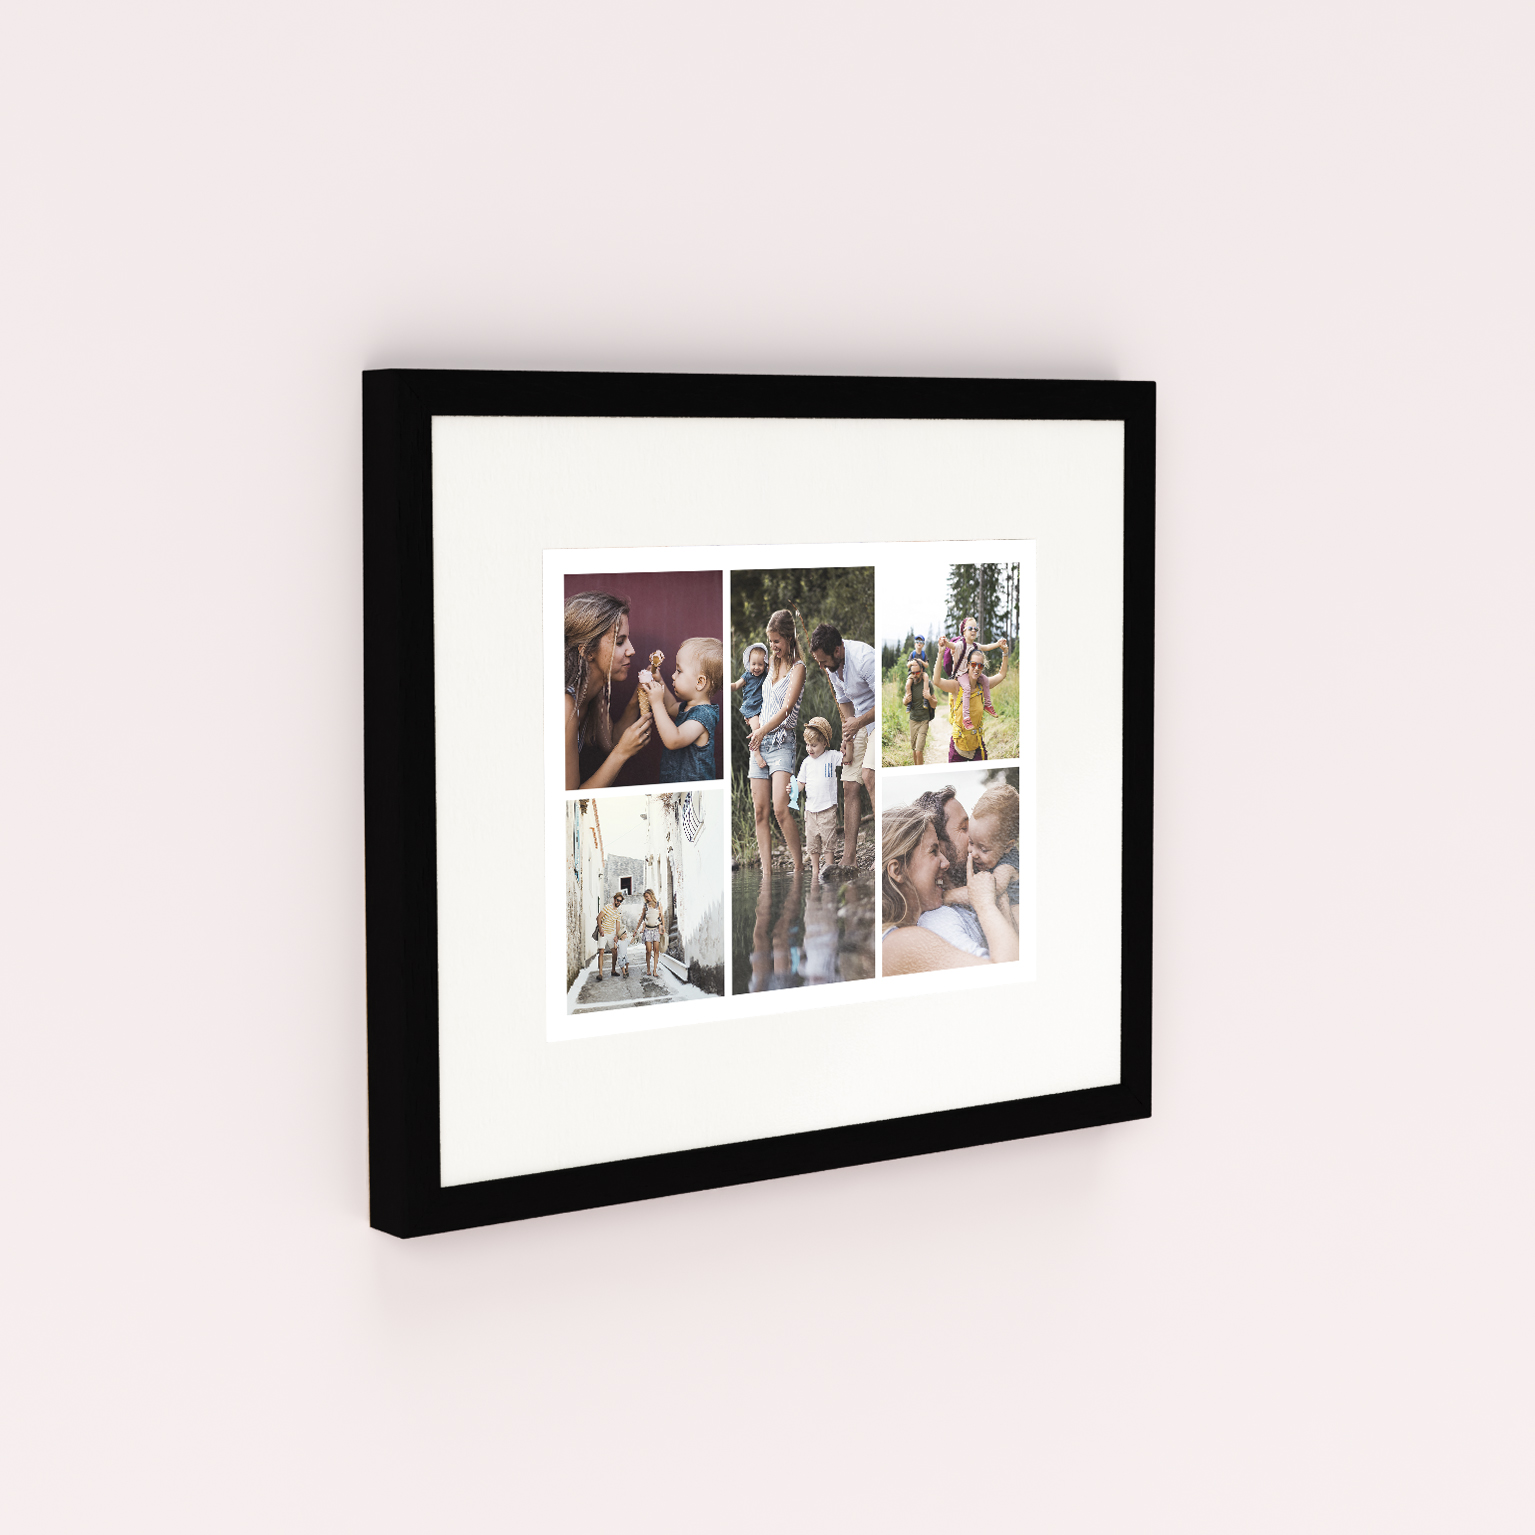 Fivefold Memories Framed Photo Prints - Capture cherished memories with this elegant framed print showcasing five photos in a cream frame. Transform them into a timeless piece of art with versatile display options for desks, shelves, or mantels. Crafted from premium materials, ensuring unparalleled clarity and durability. An ideal stylish keepsake celebrating life's unique journey.